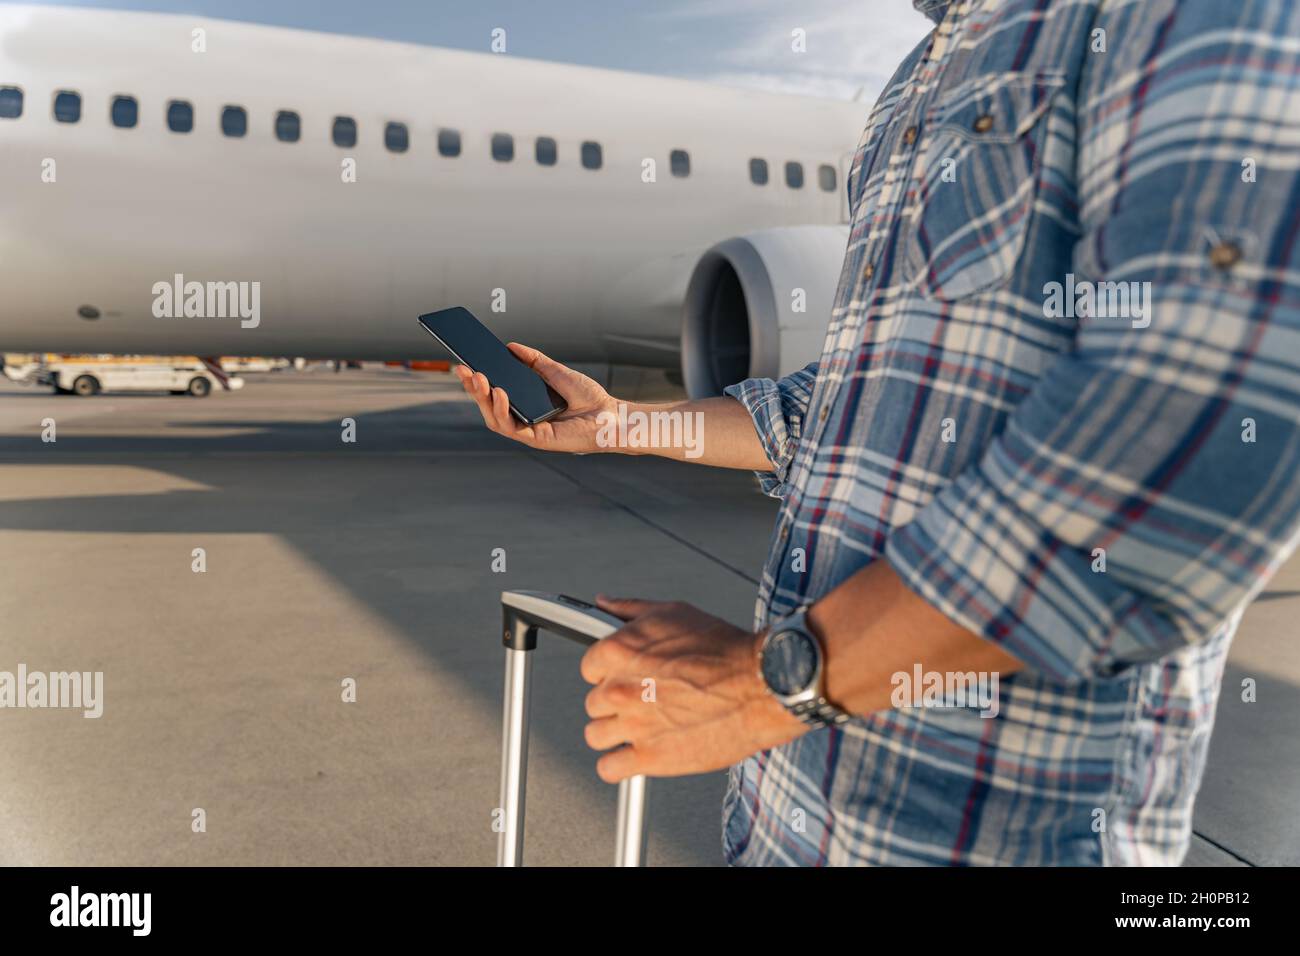 Male passenger holding a smartphone and a comb before the flight Stock Photo